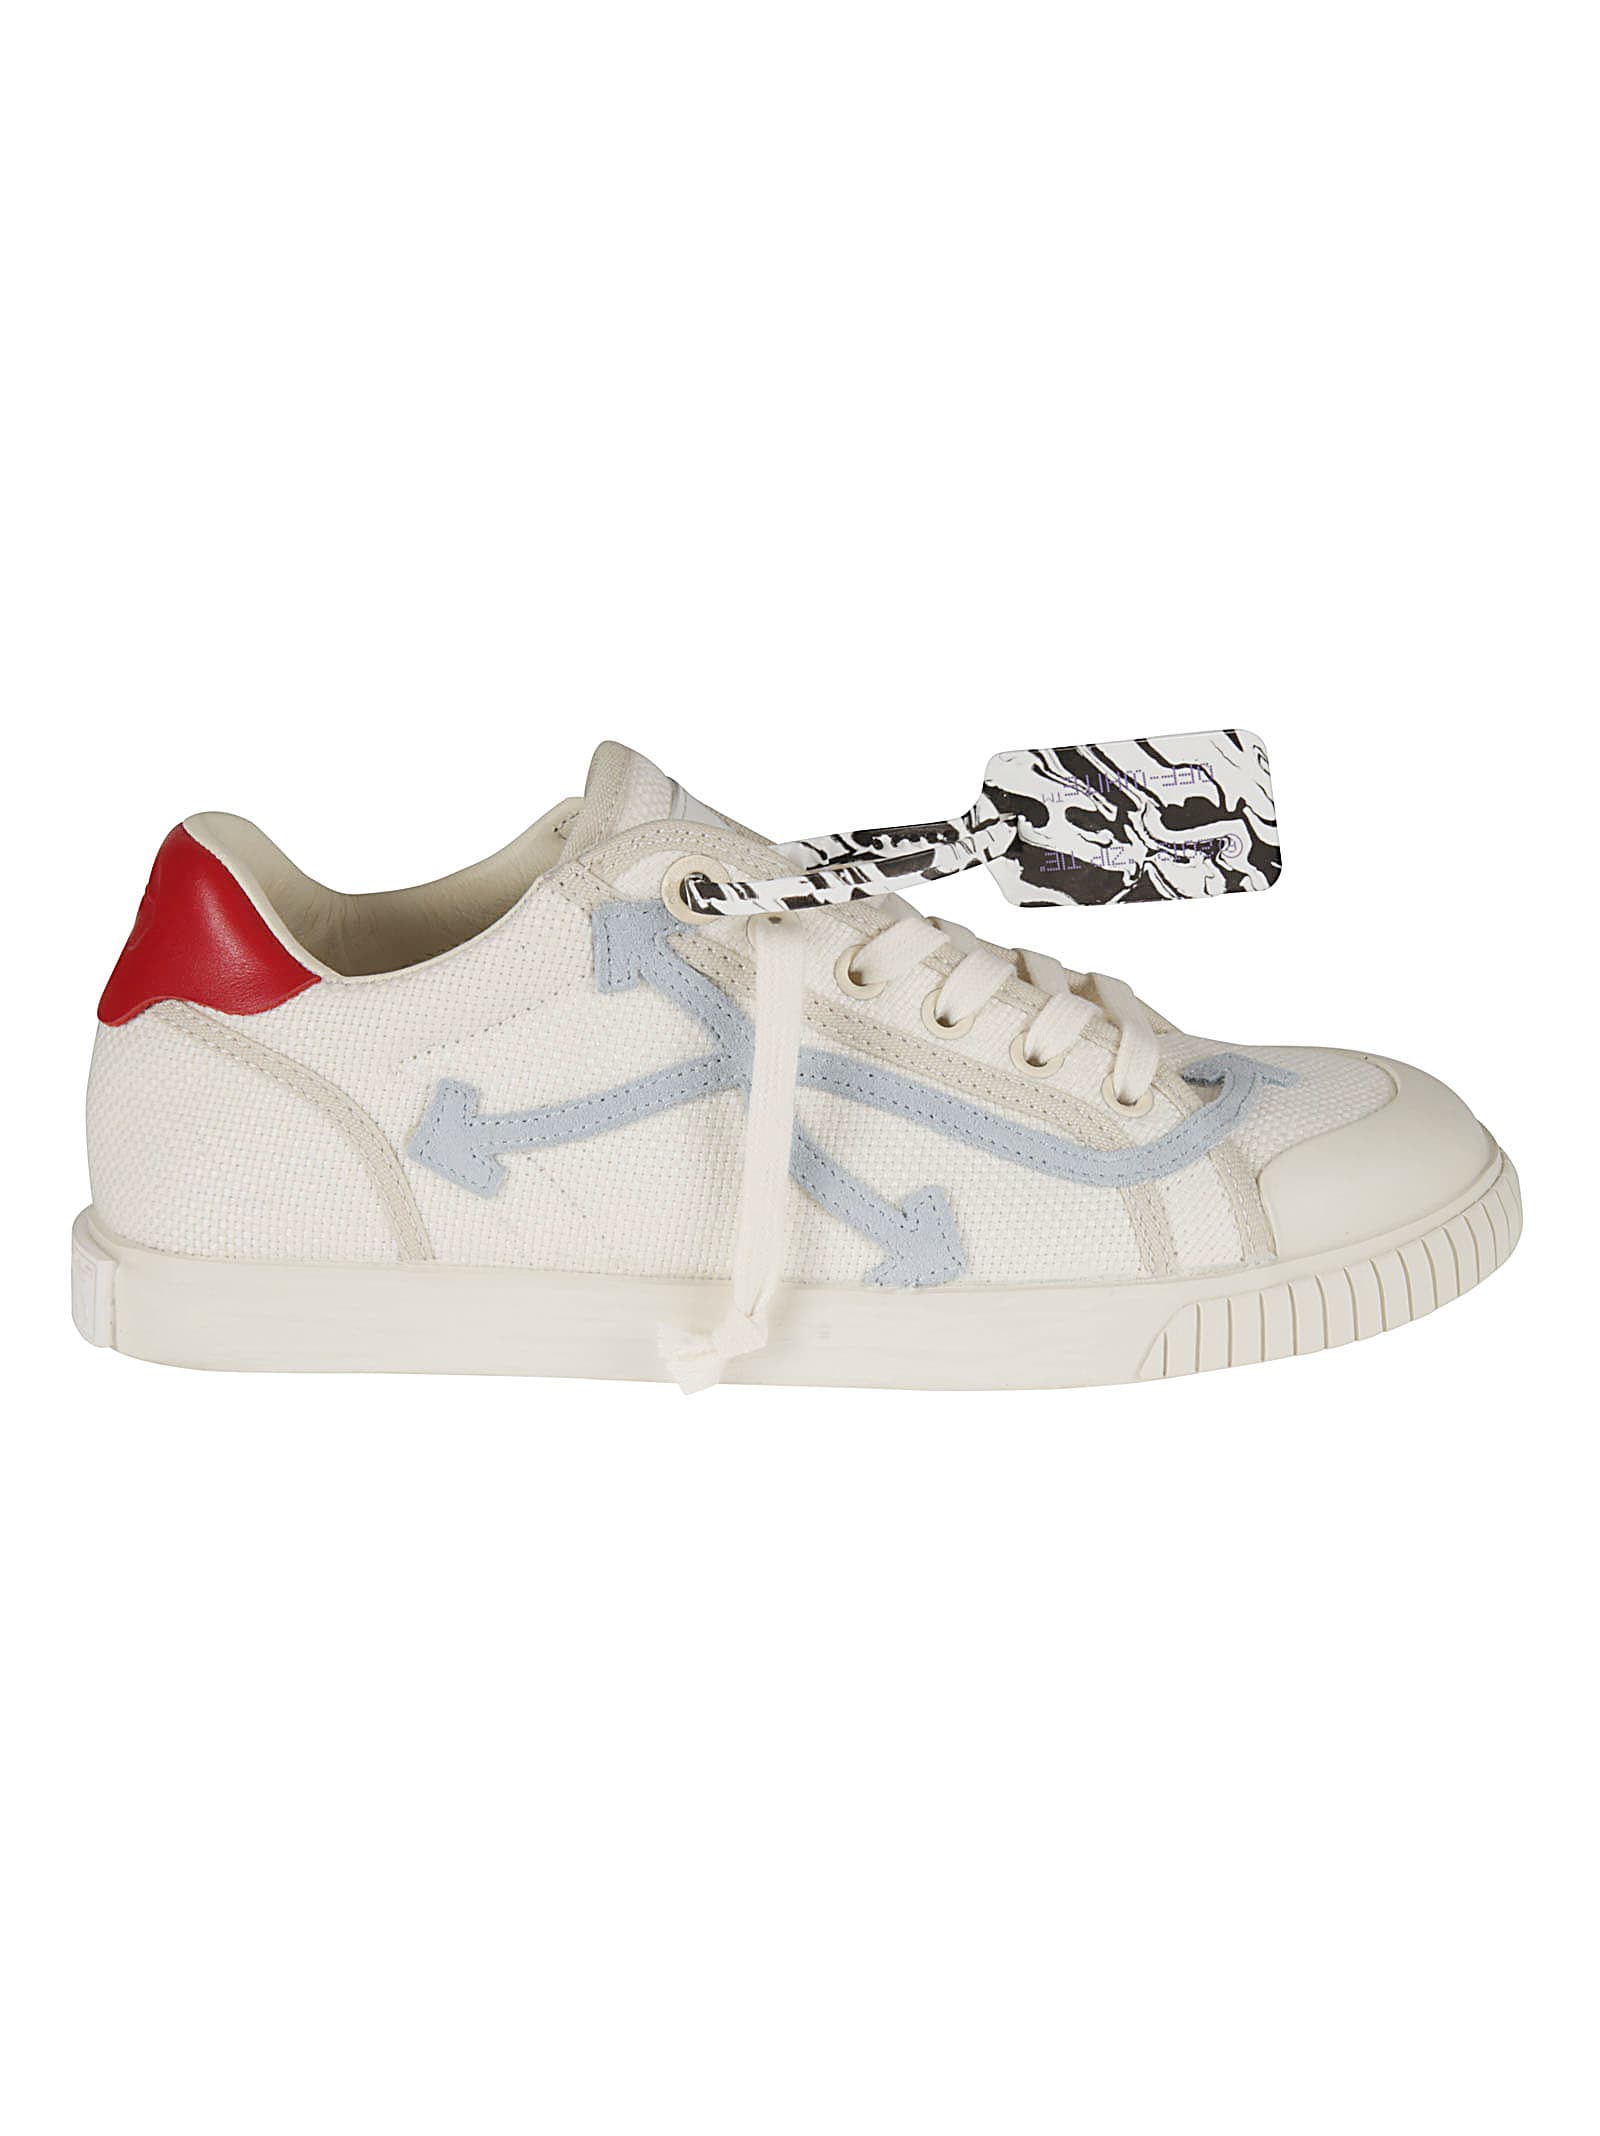 Off-White New Low Vulcanized Sneakers